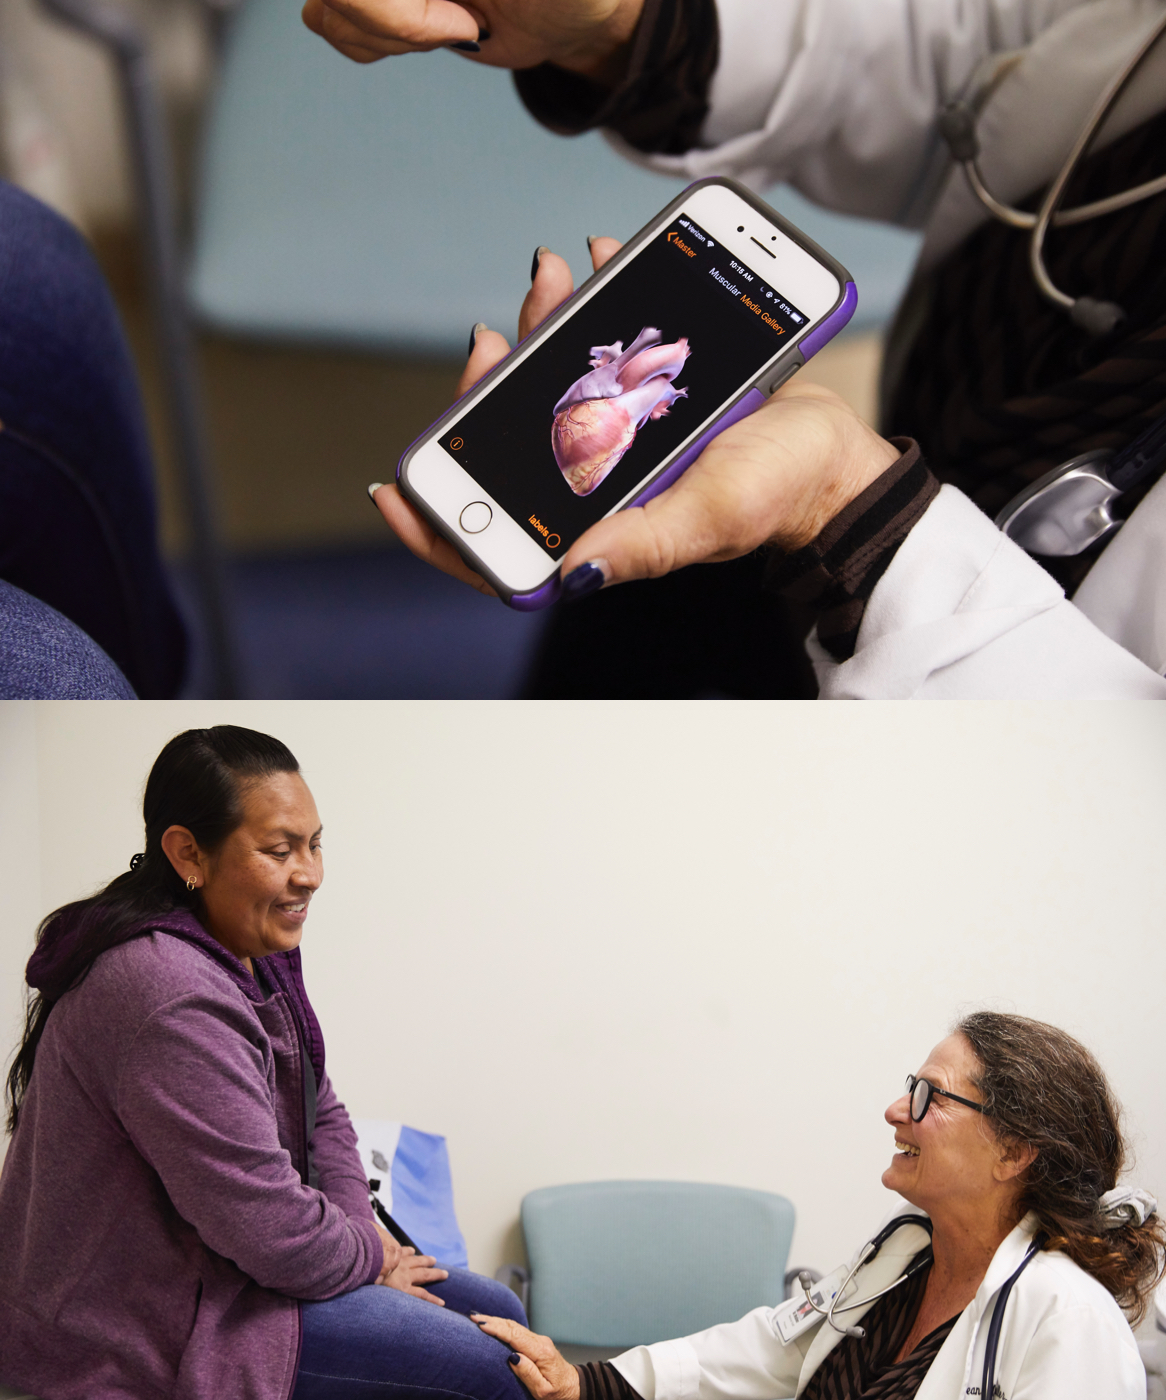 Collage where the top image is a close up of an image of a heart on a phone screen and the bottom image is a white doctor and Latina patient smiling at each other